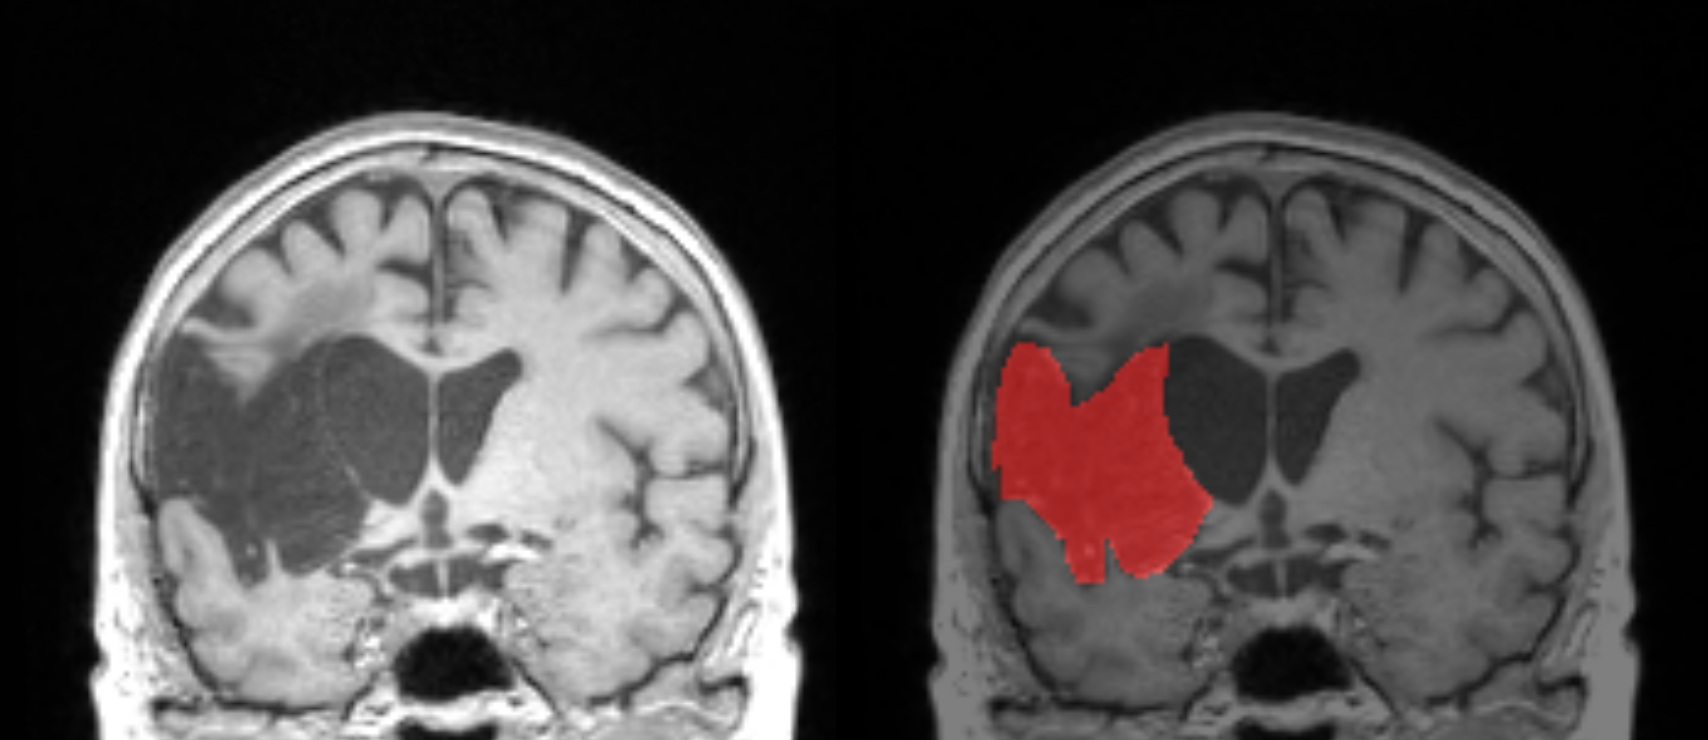 Illustration of a structural image with a stroke lesion (left) and the corresponding lesion mask in red (right). The lesion mask is expressed as a 3D volume of values. In this example, the voxels in red have the value of 1, that is, lesioned, whereas the non-coloured voxels have the value of 0, that is, not lesioned.